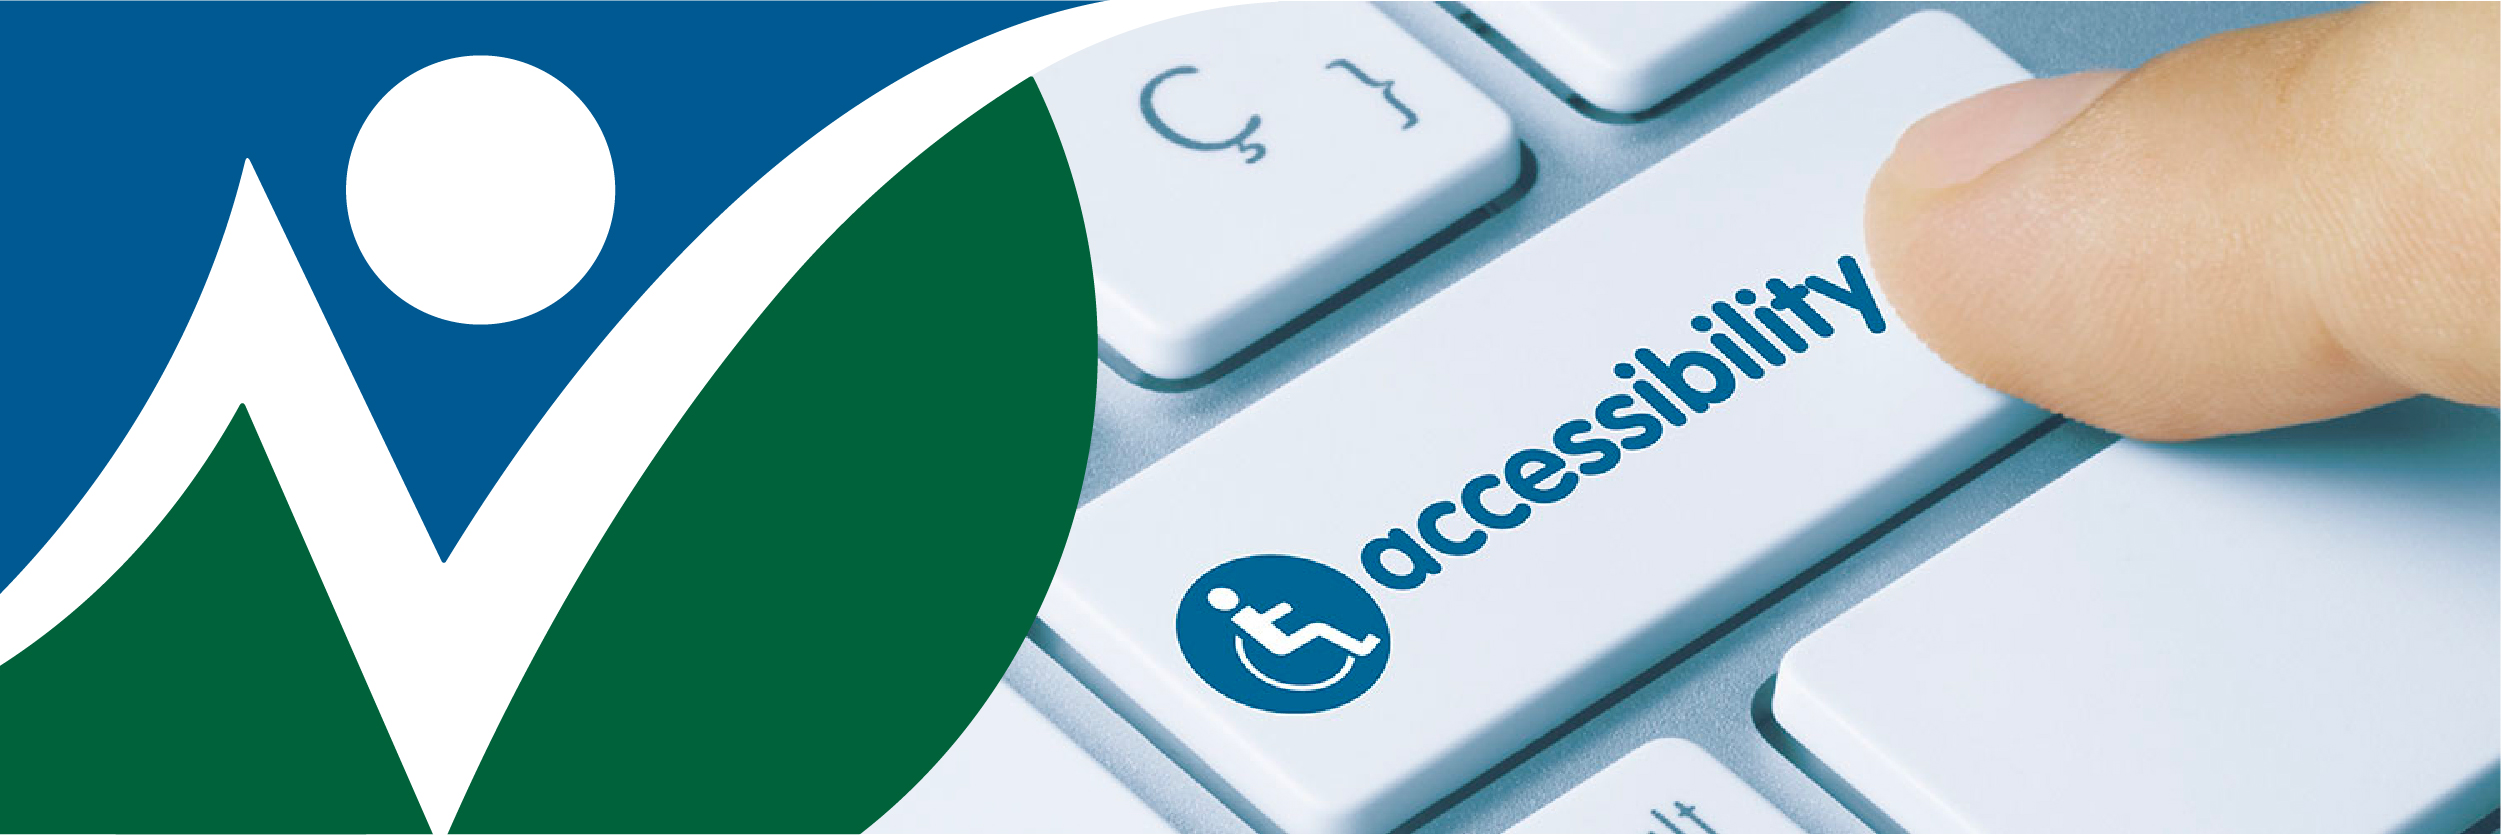 NNCIL logo next to a finger pushing a computer button that says "accessibility"